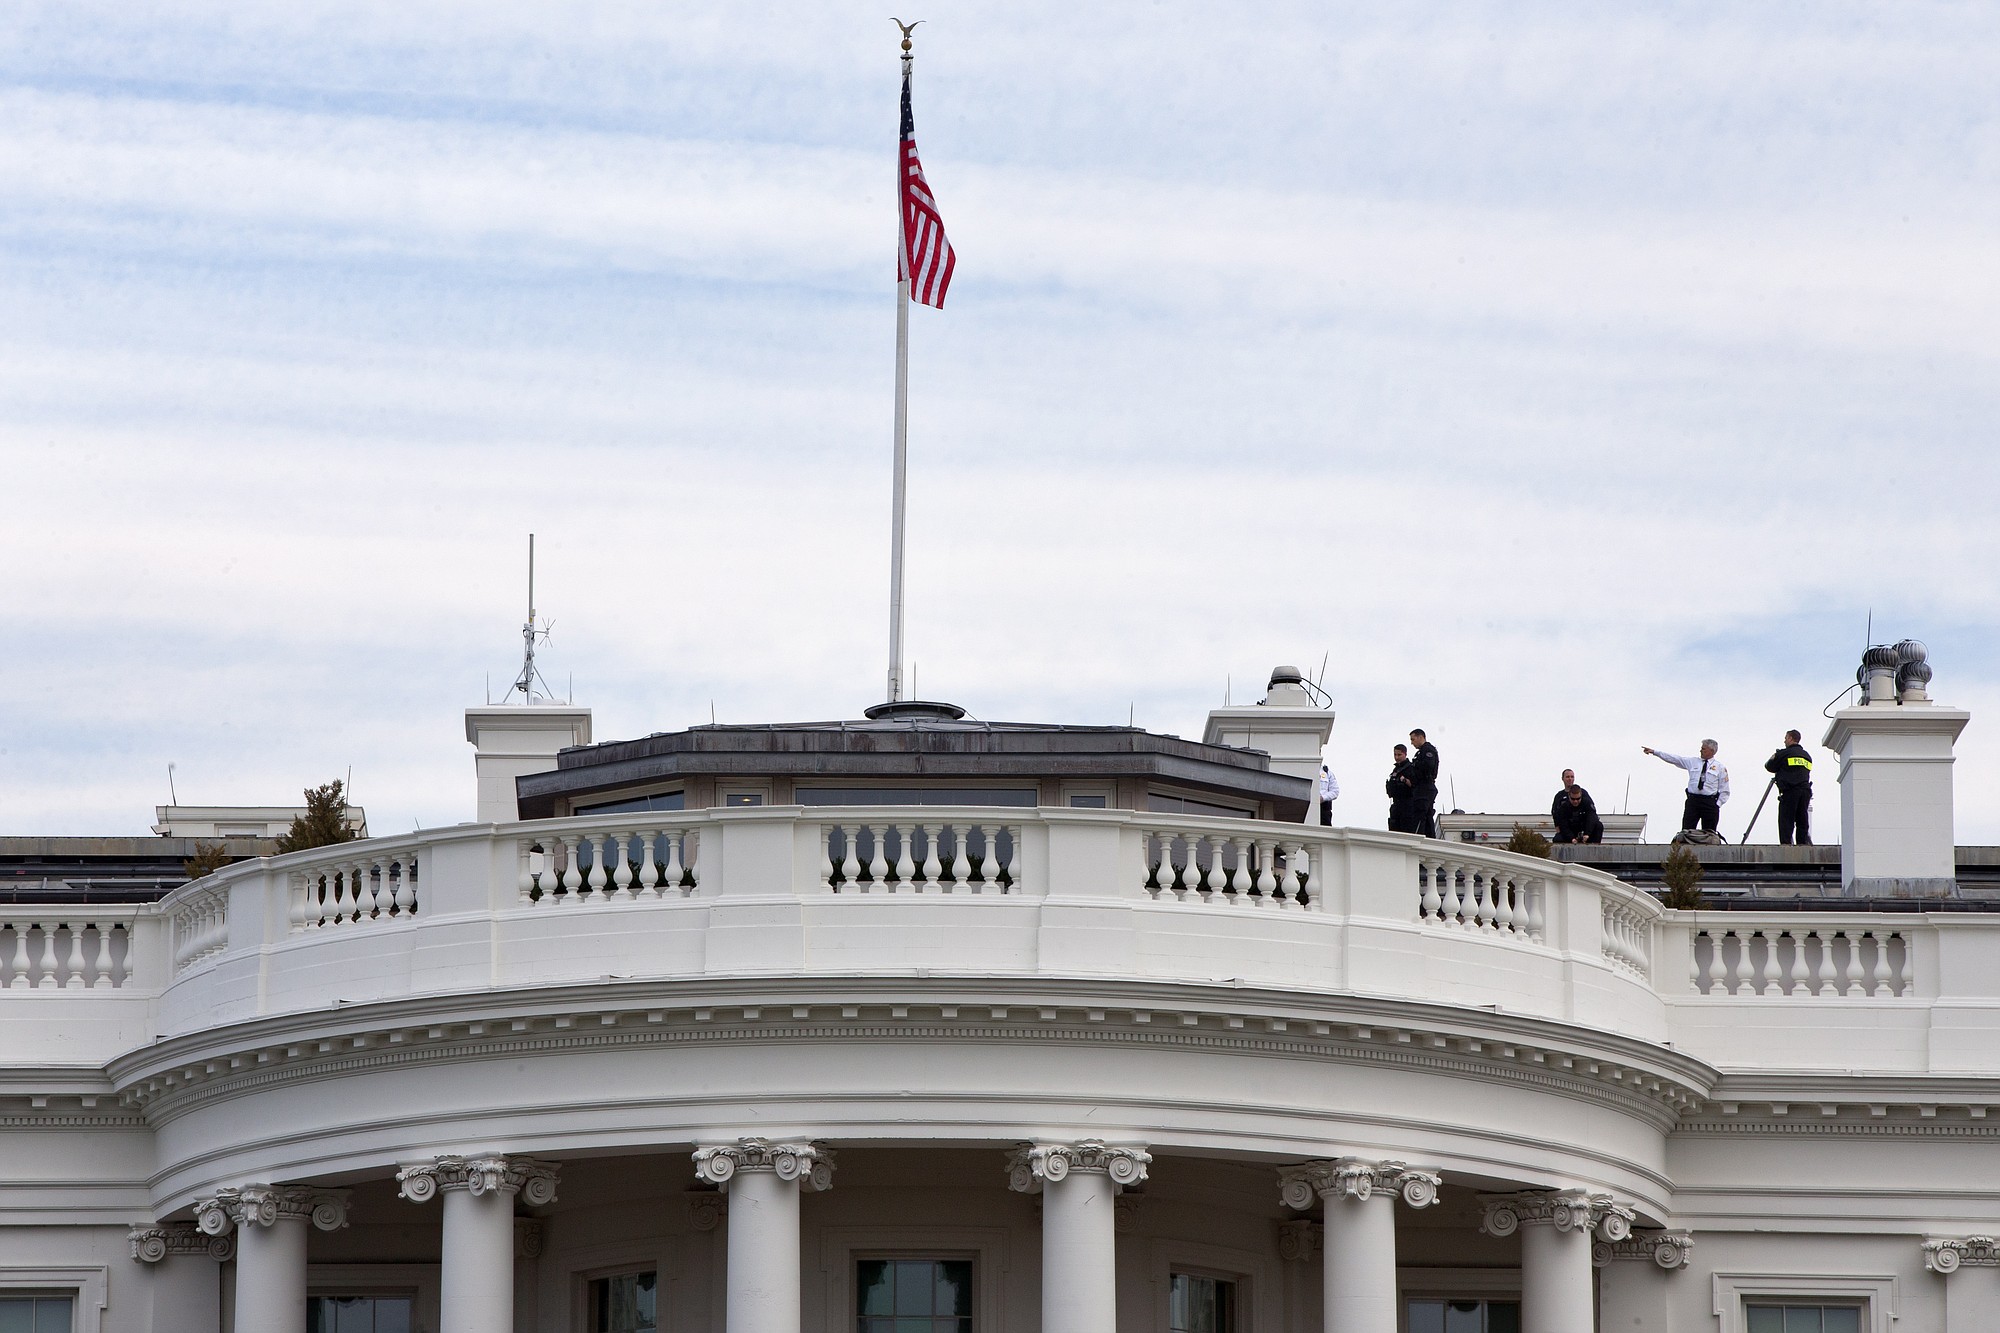 Uniformed Secret Service agents patrol the top of the White House as seen from the South Lawn of the White House in Washington on Tuesday. According to the Secret Service a letter sent to the White House tentatively tested positive for cyanide.